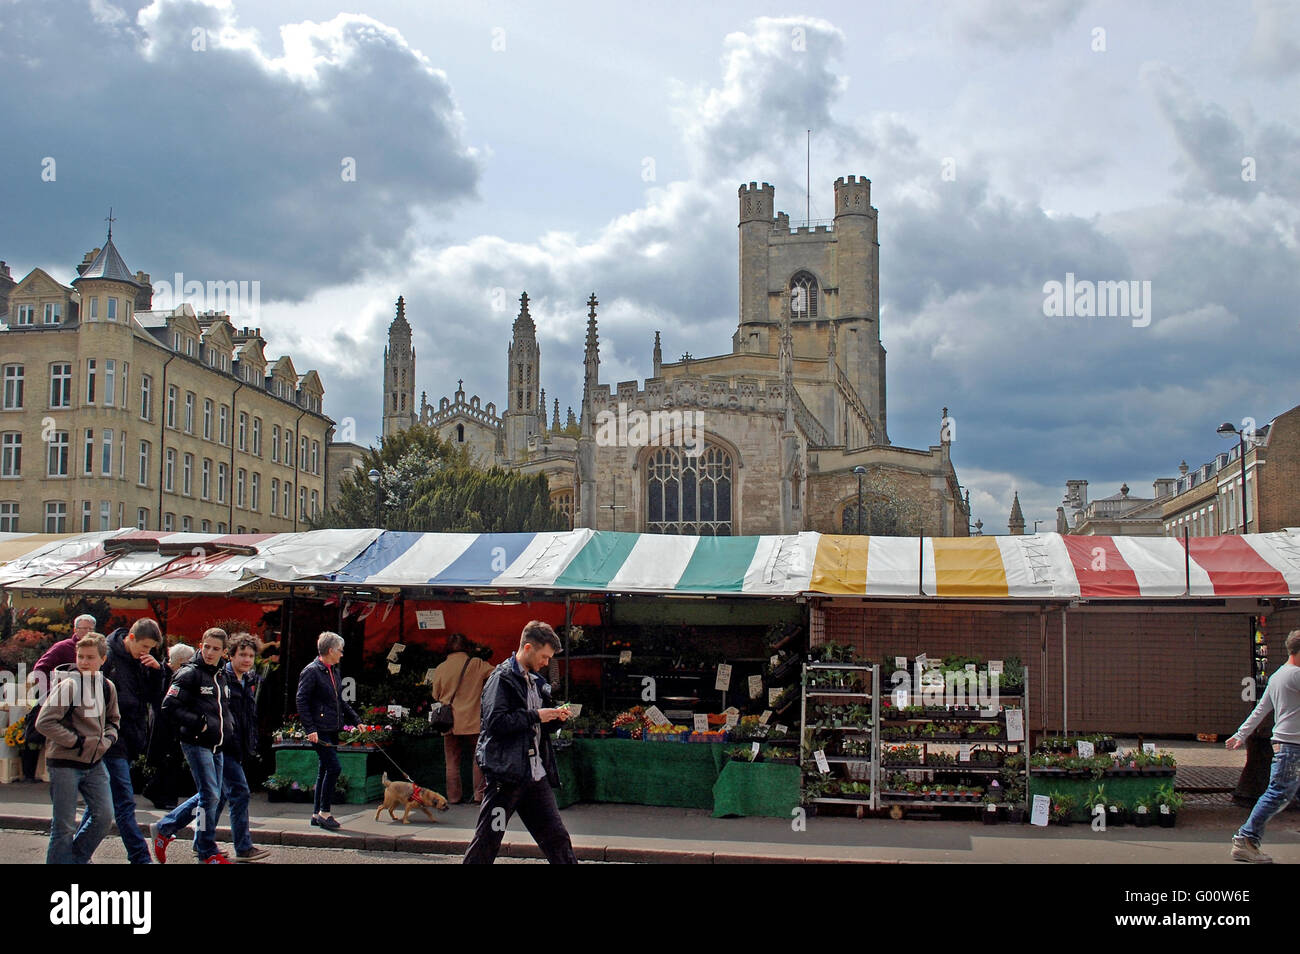 Students stroll past the brightly colored awnings of Cambridge market with the ornate towers of Kings College, in the background Stock Photo